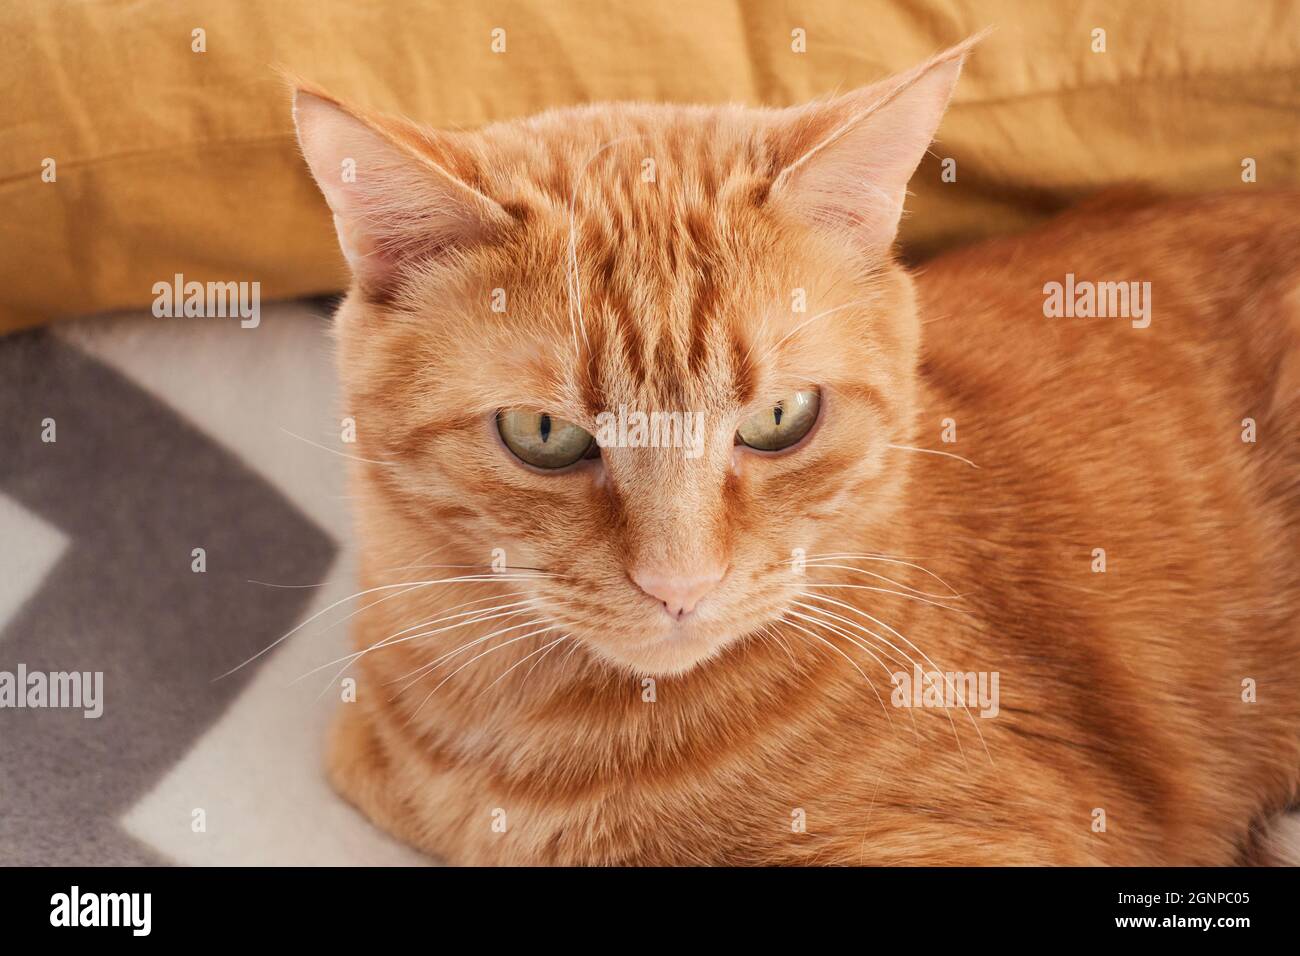 A cute lazy ginger tabby cat sleeps on a bed with gray blanket near the pillow. Unique domesticated cat relax or rest concept. High quality photo Stock Photo